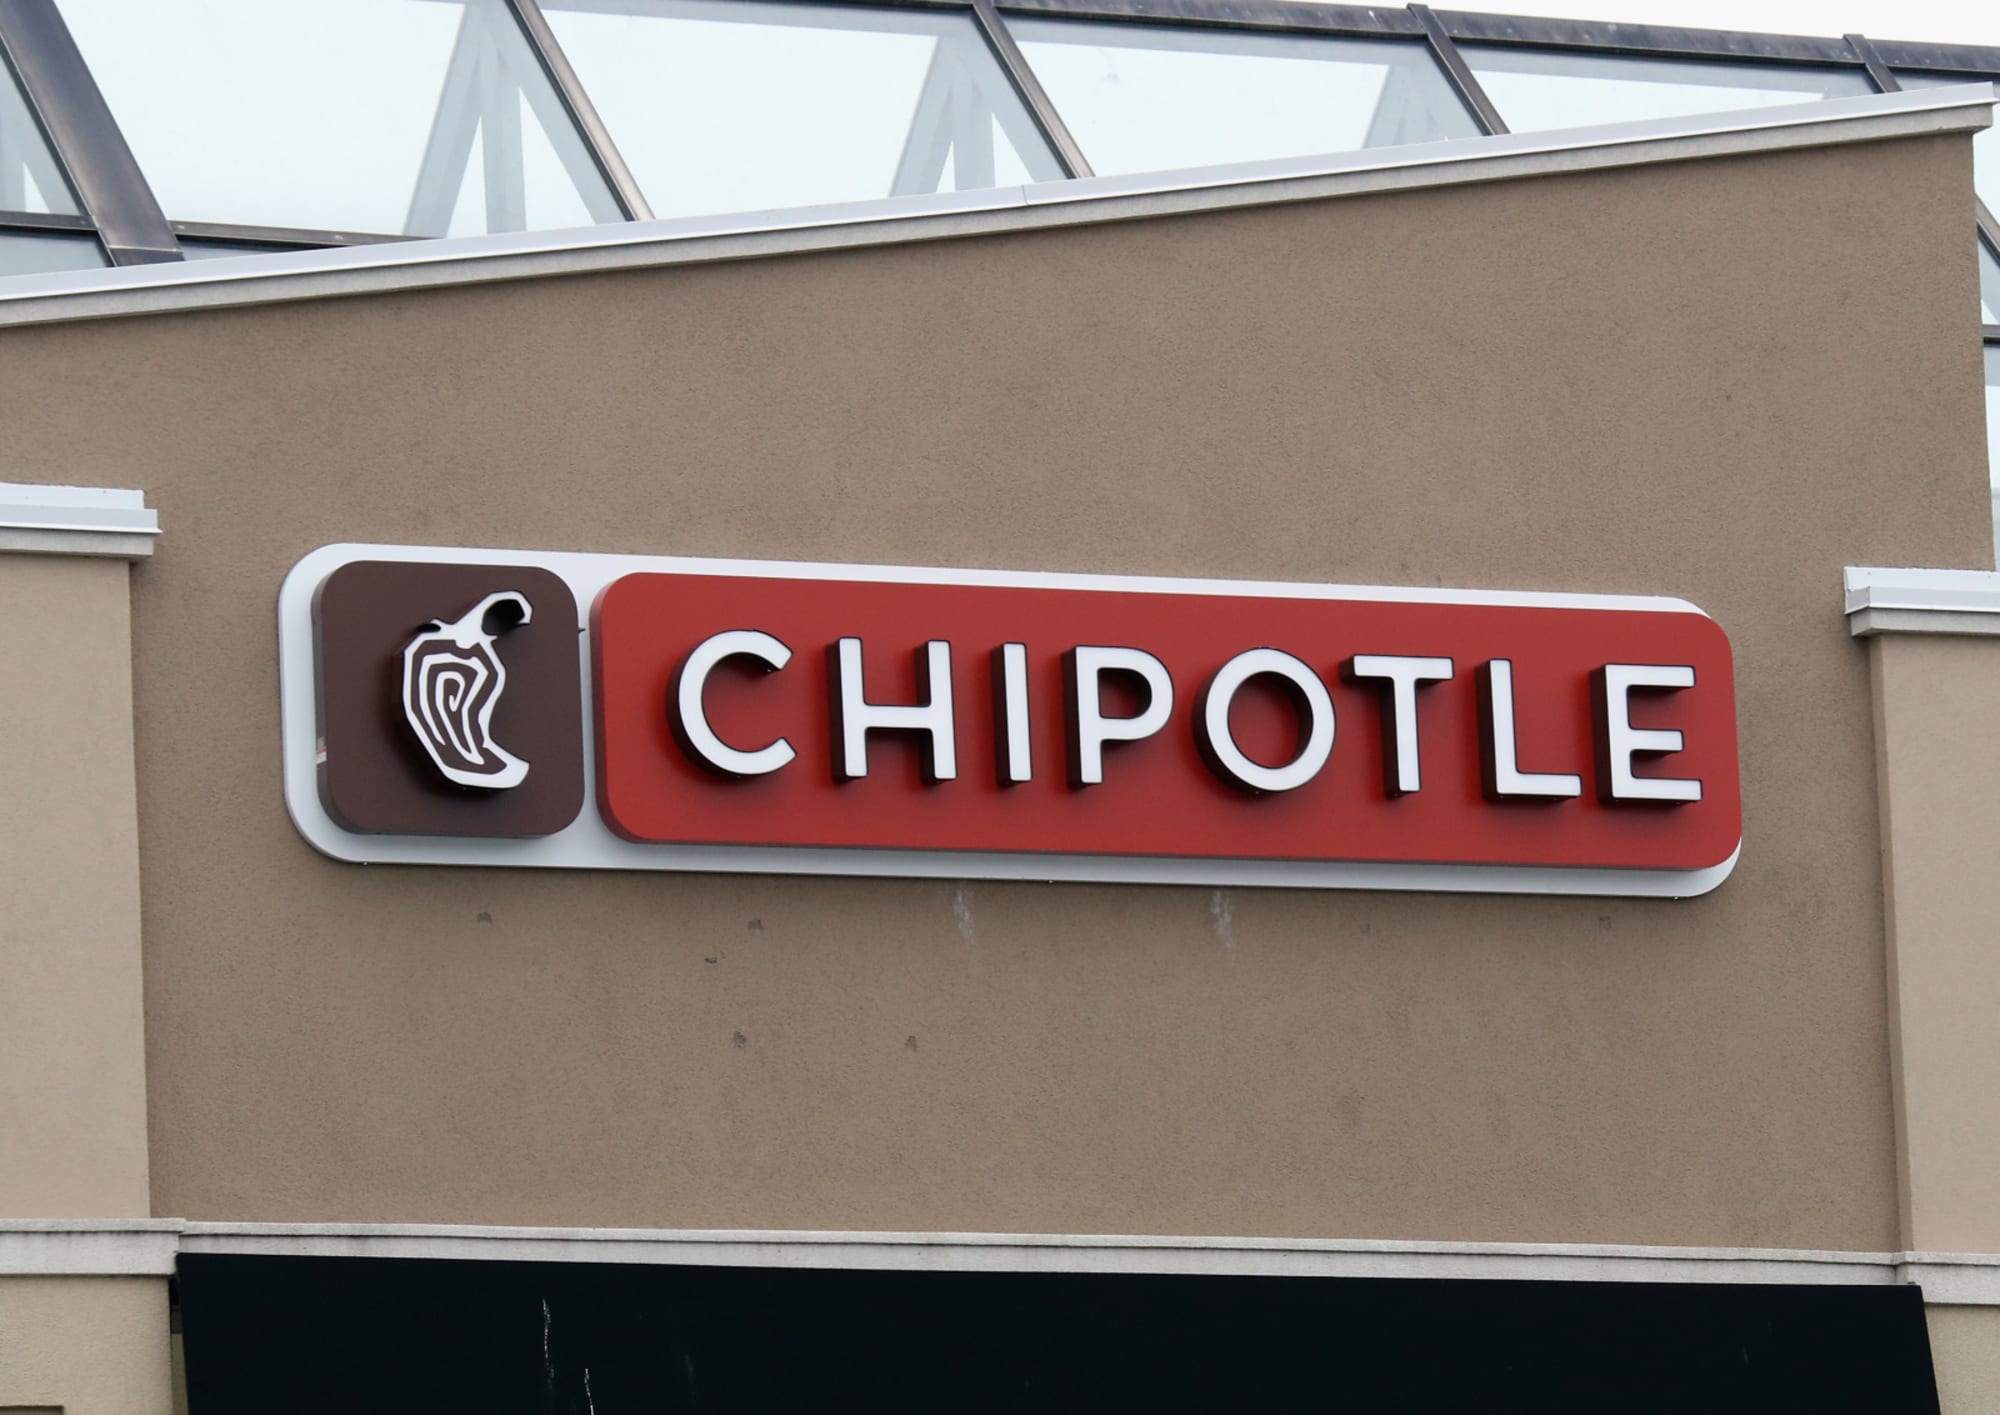 Chipotle free delivery Monday scores big with Chipotle Rewards members